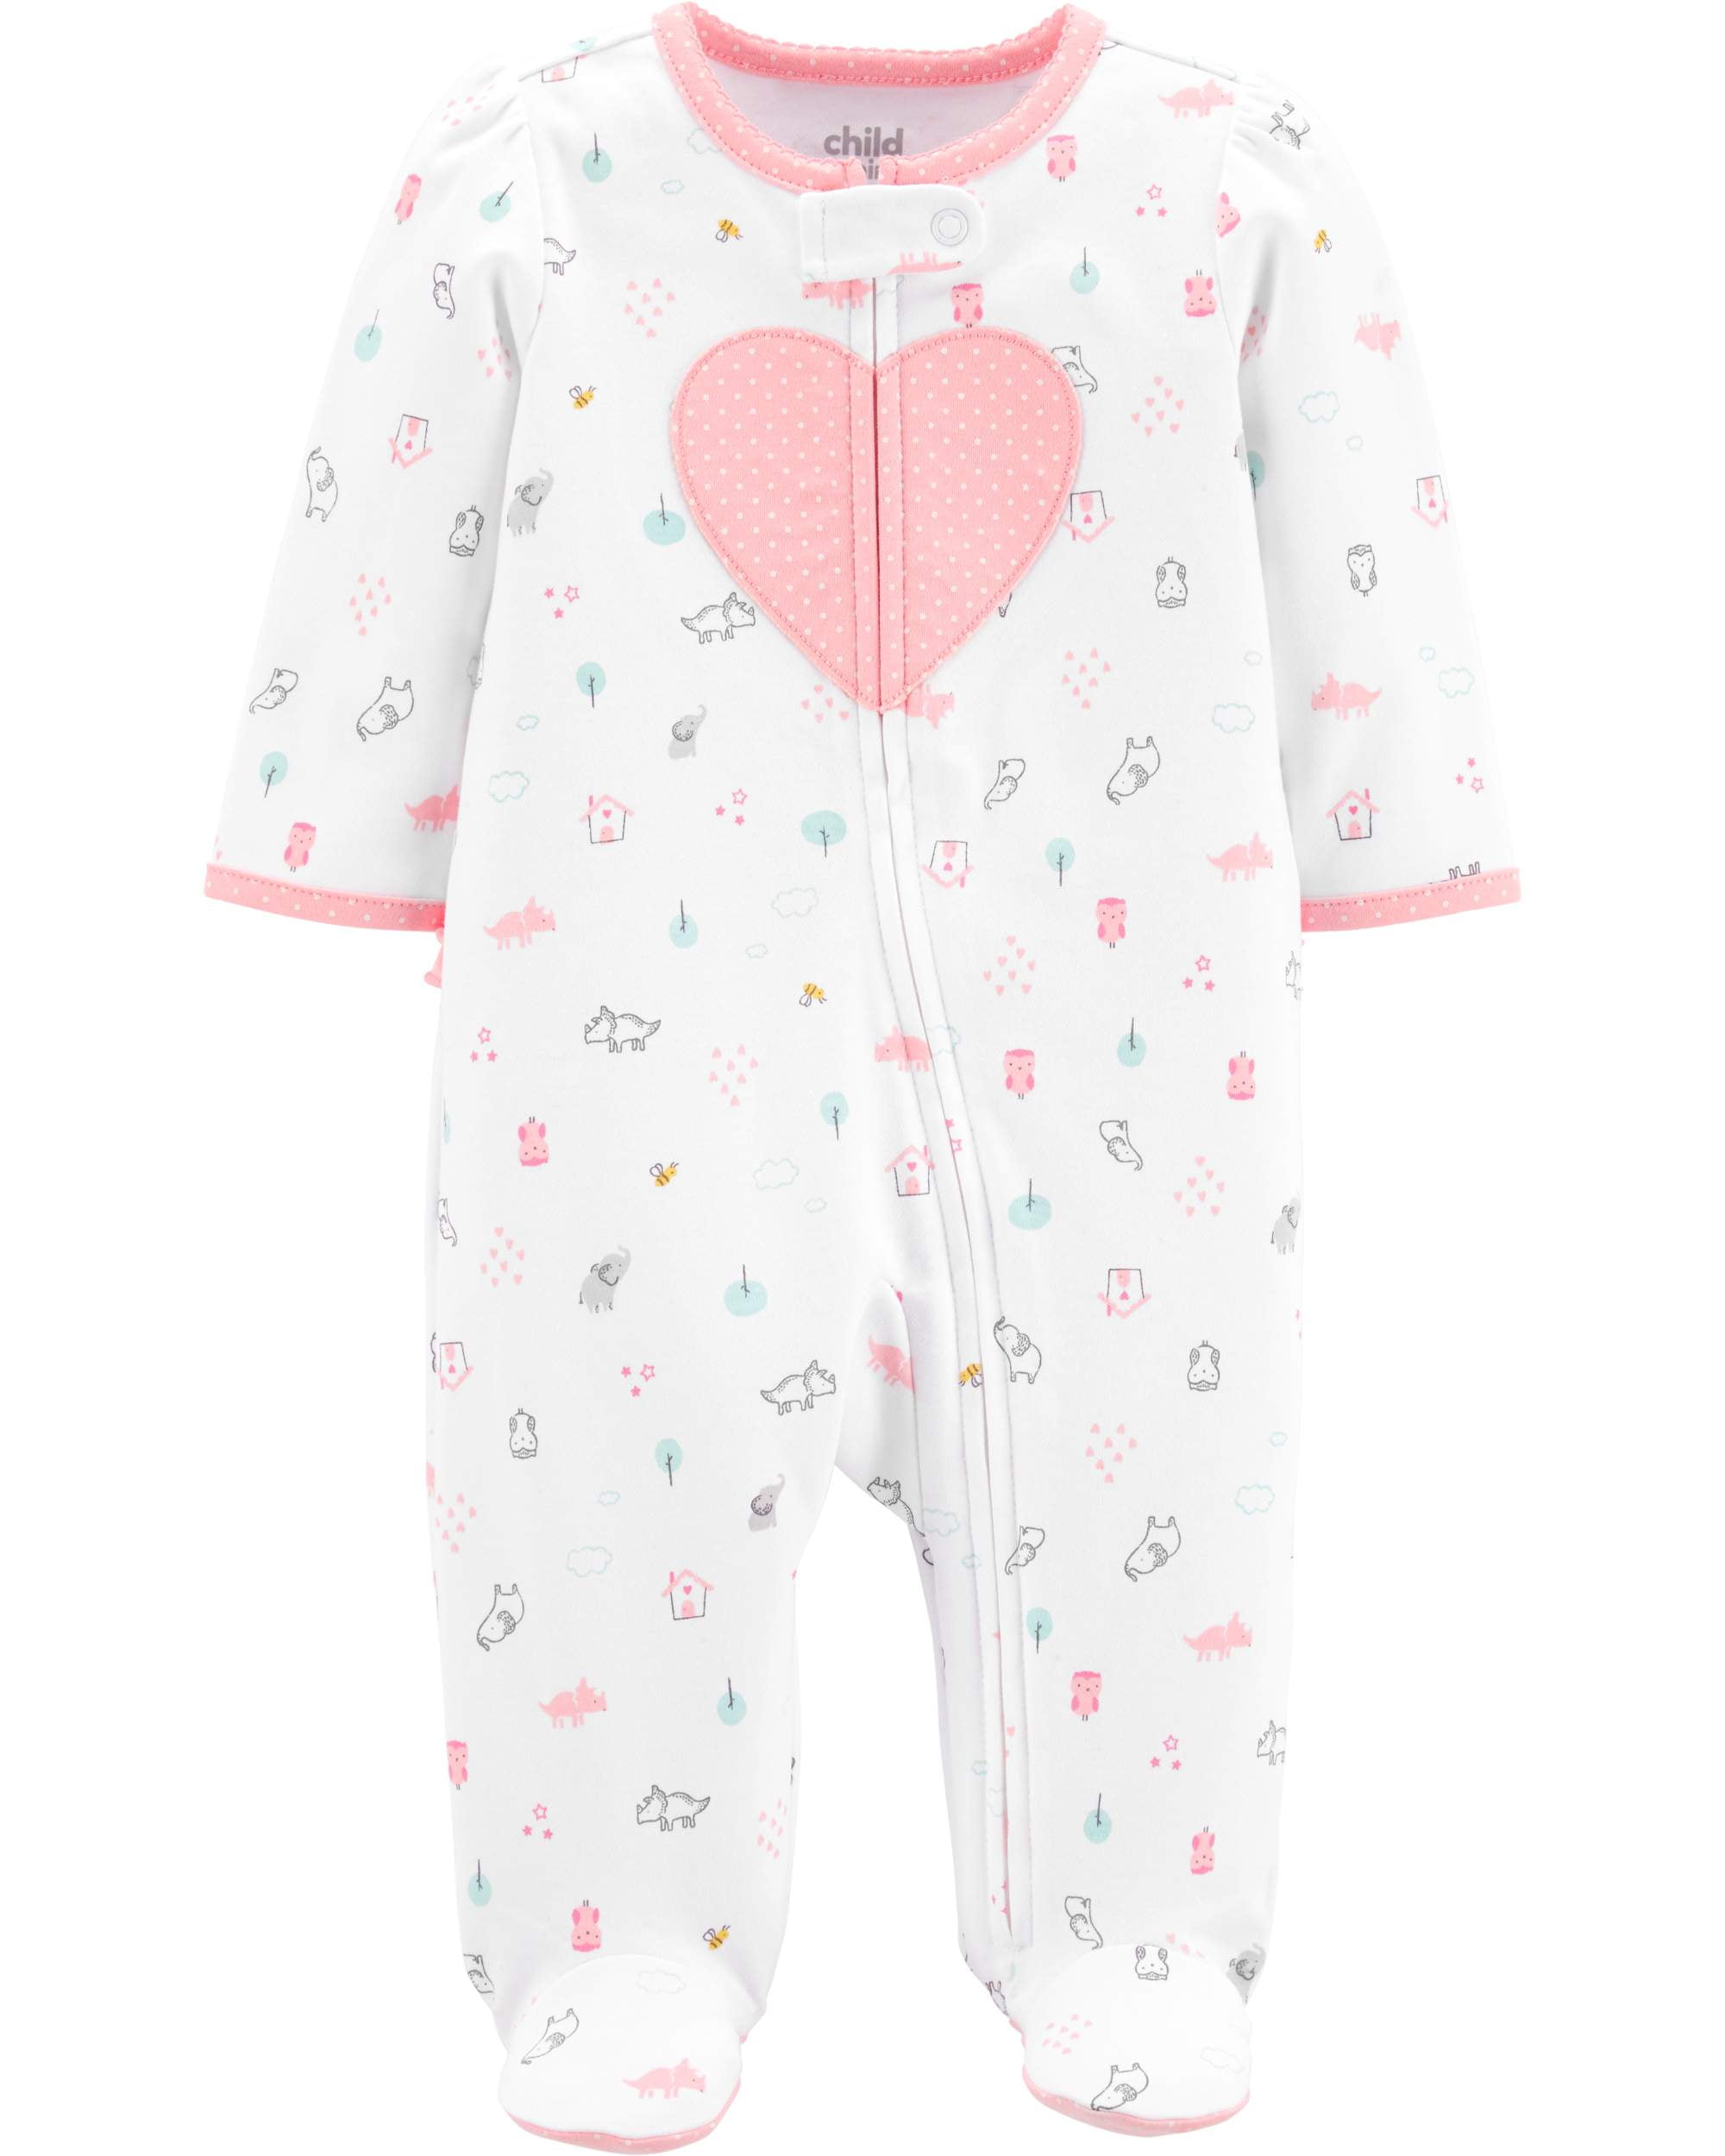 Details about   Carter's Child of Mine Baby Girls Christmas Sleep & Play 1 Piece Mo Sz NB NEW 